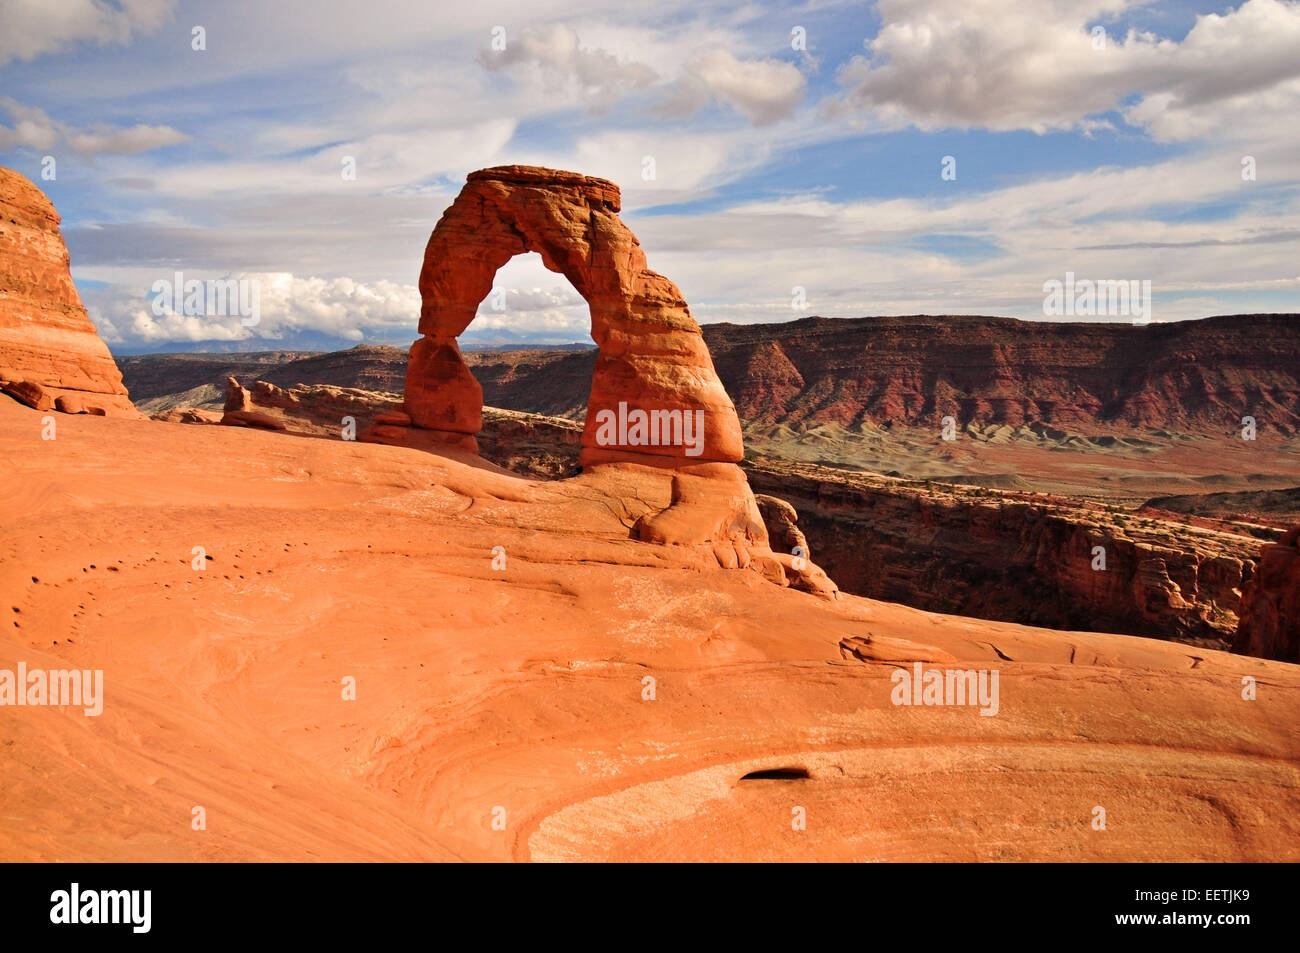 World-famous Delicate Arch, Arches National Park, UT, USA. Stock Photo